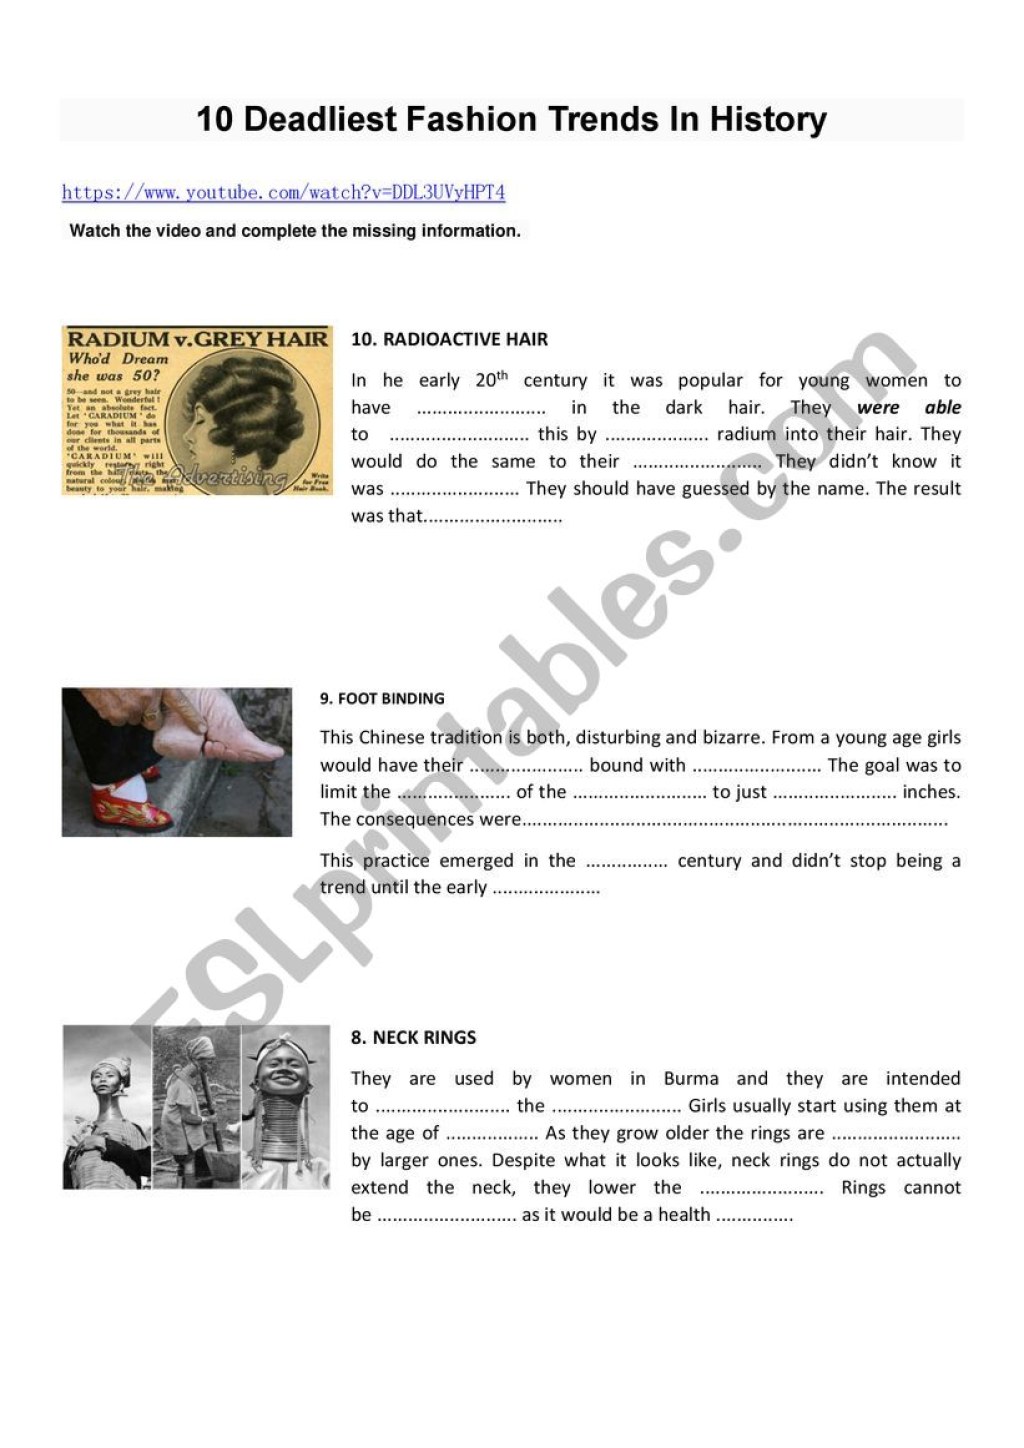 fashion trends lesson plan - O DEADLIEST FASHION TRENDS IN HISTORY - ESL worksheet by carraca